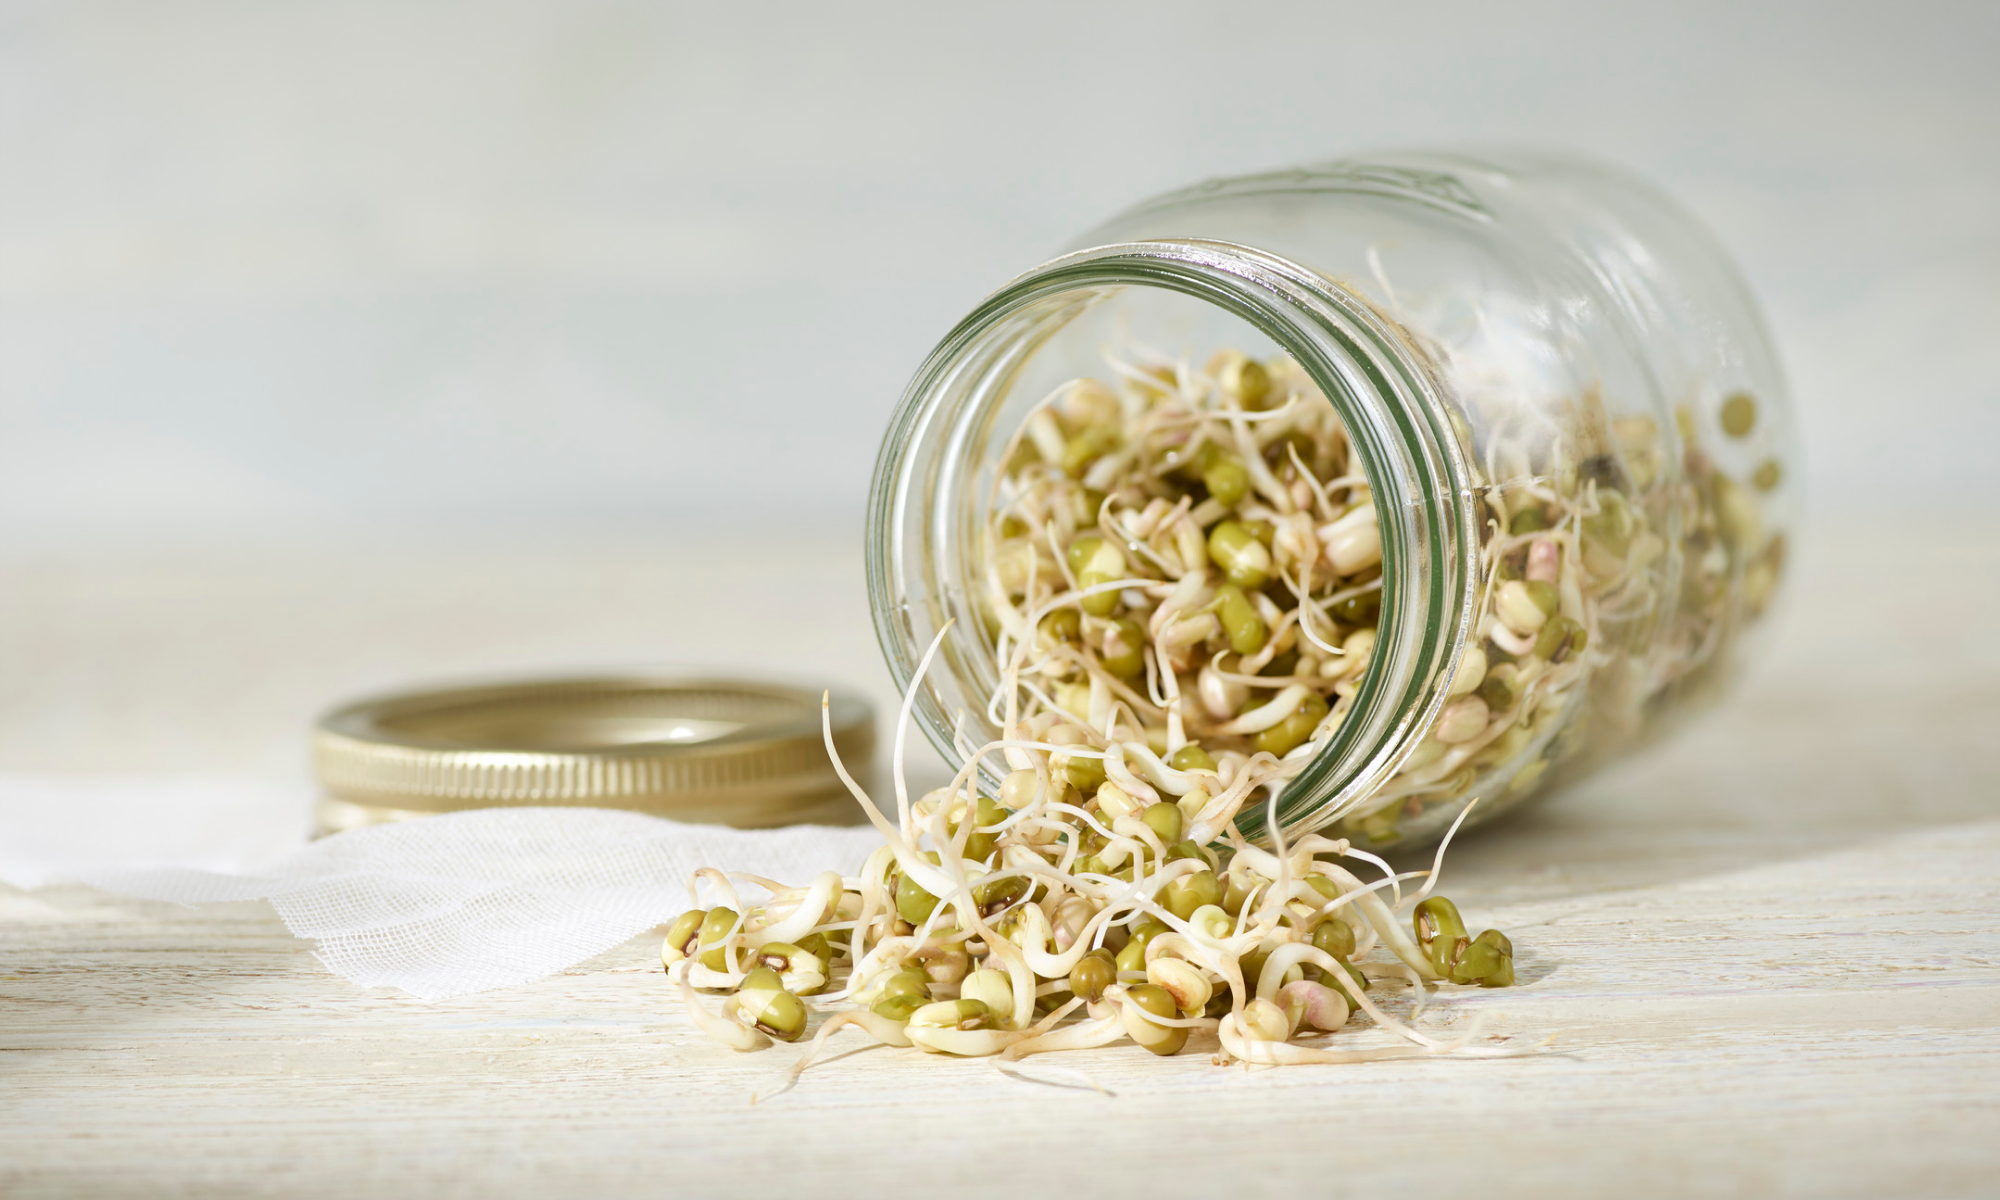 3 Easy Steps to Grow Sprouts in a Mason Jar